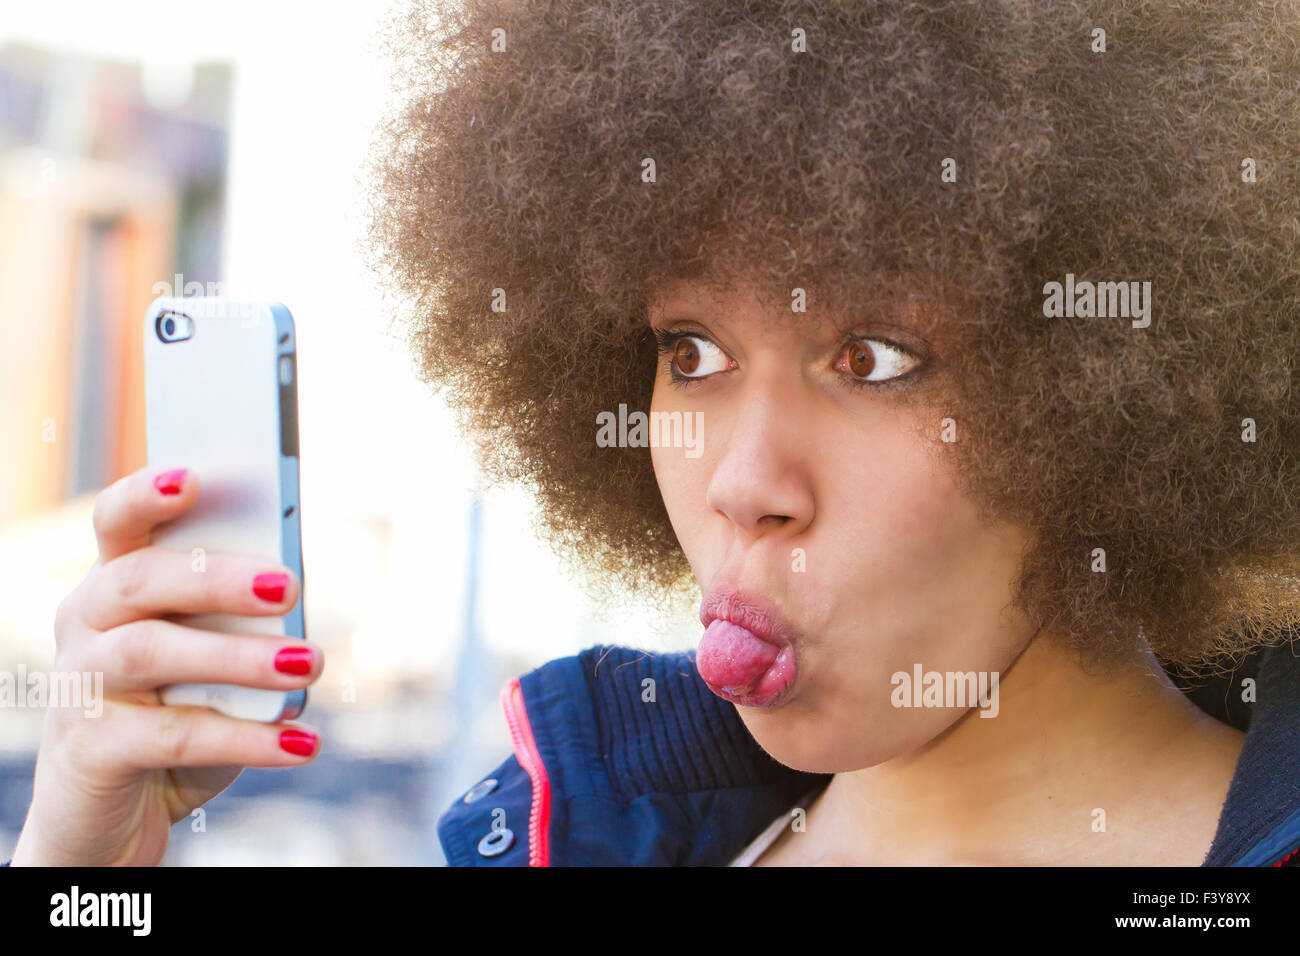 Young woman with afro hair cut makin a funny self portrait Stock Photo